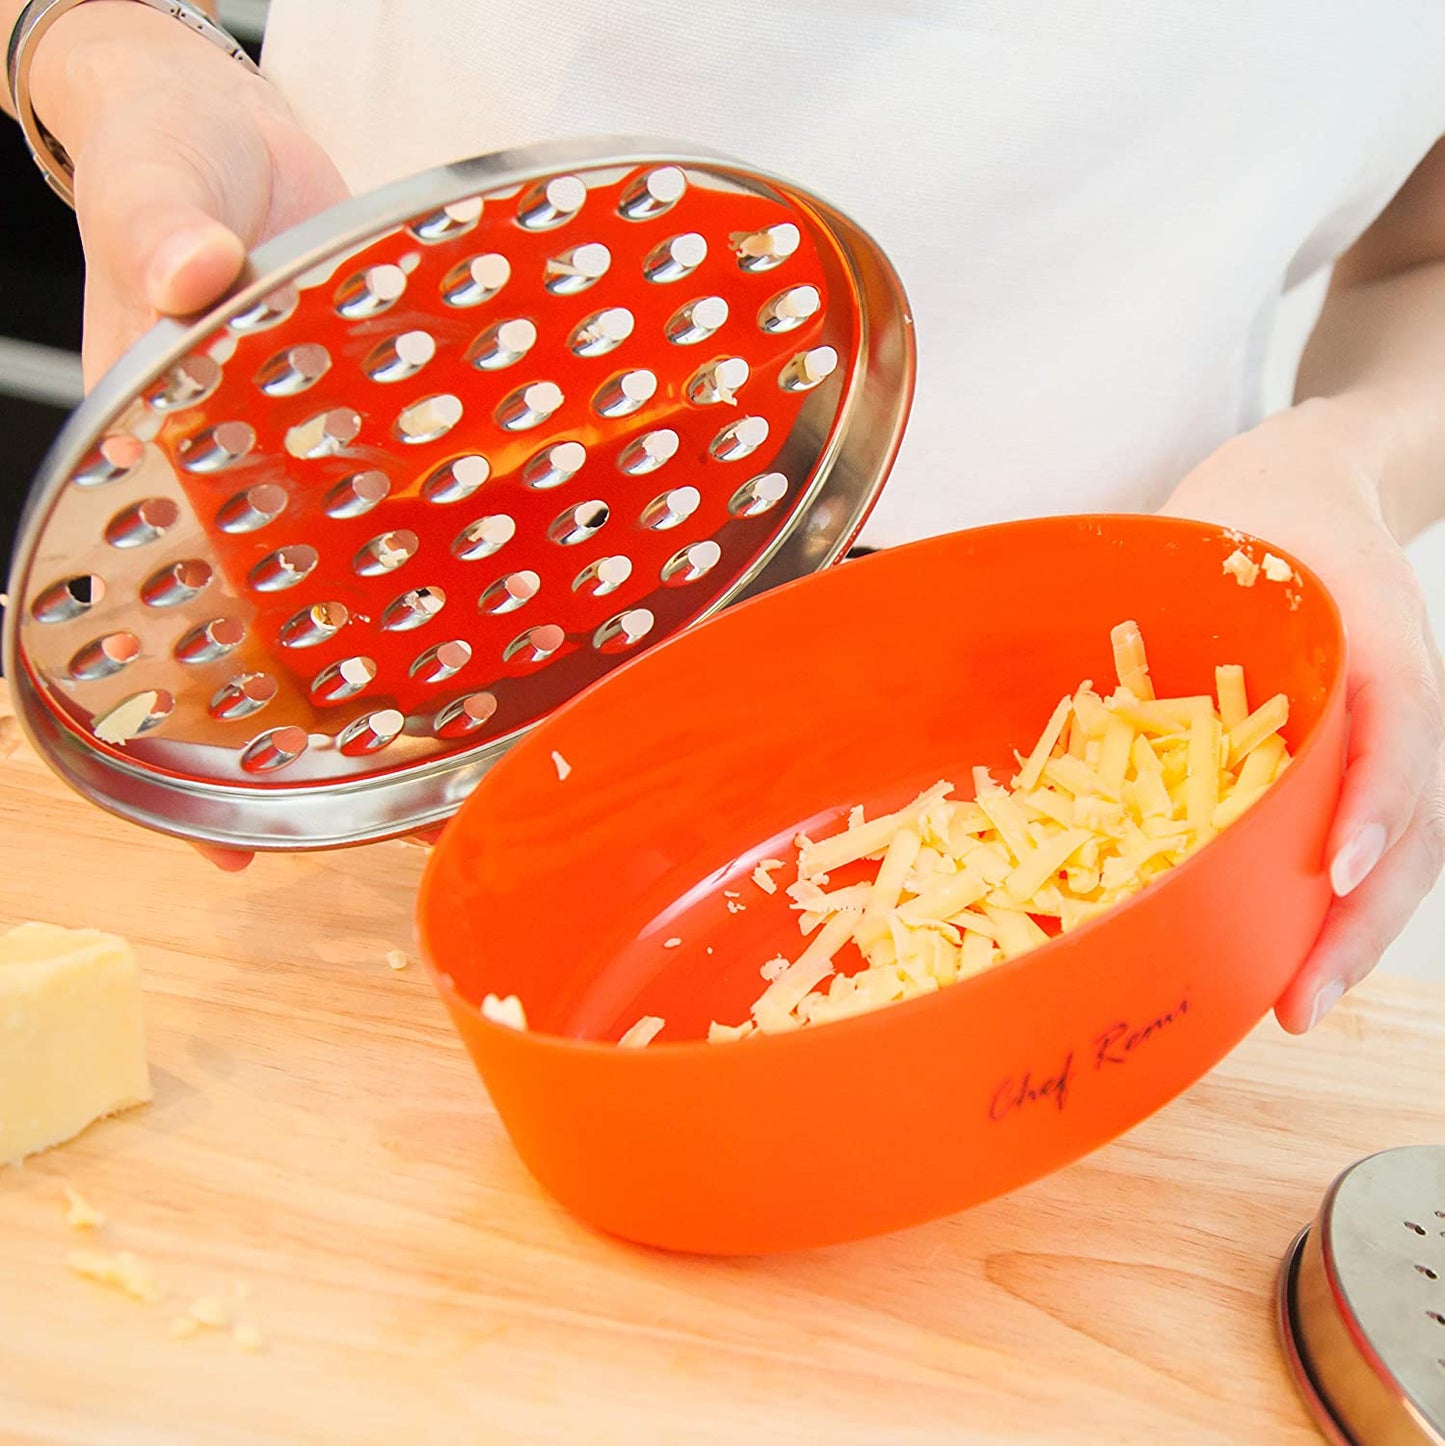 Chef Remi Cheese Grater | Vegetable Grater -2 Size Blades with Storage Container and Lid